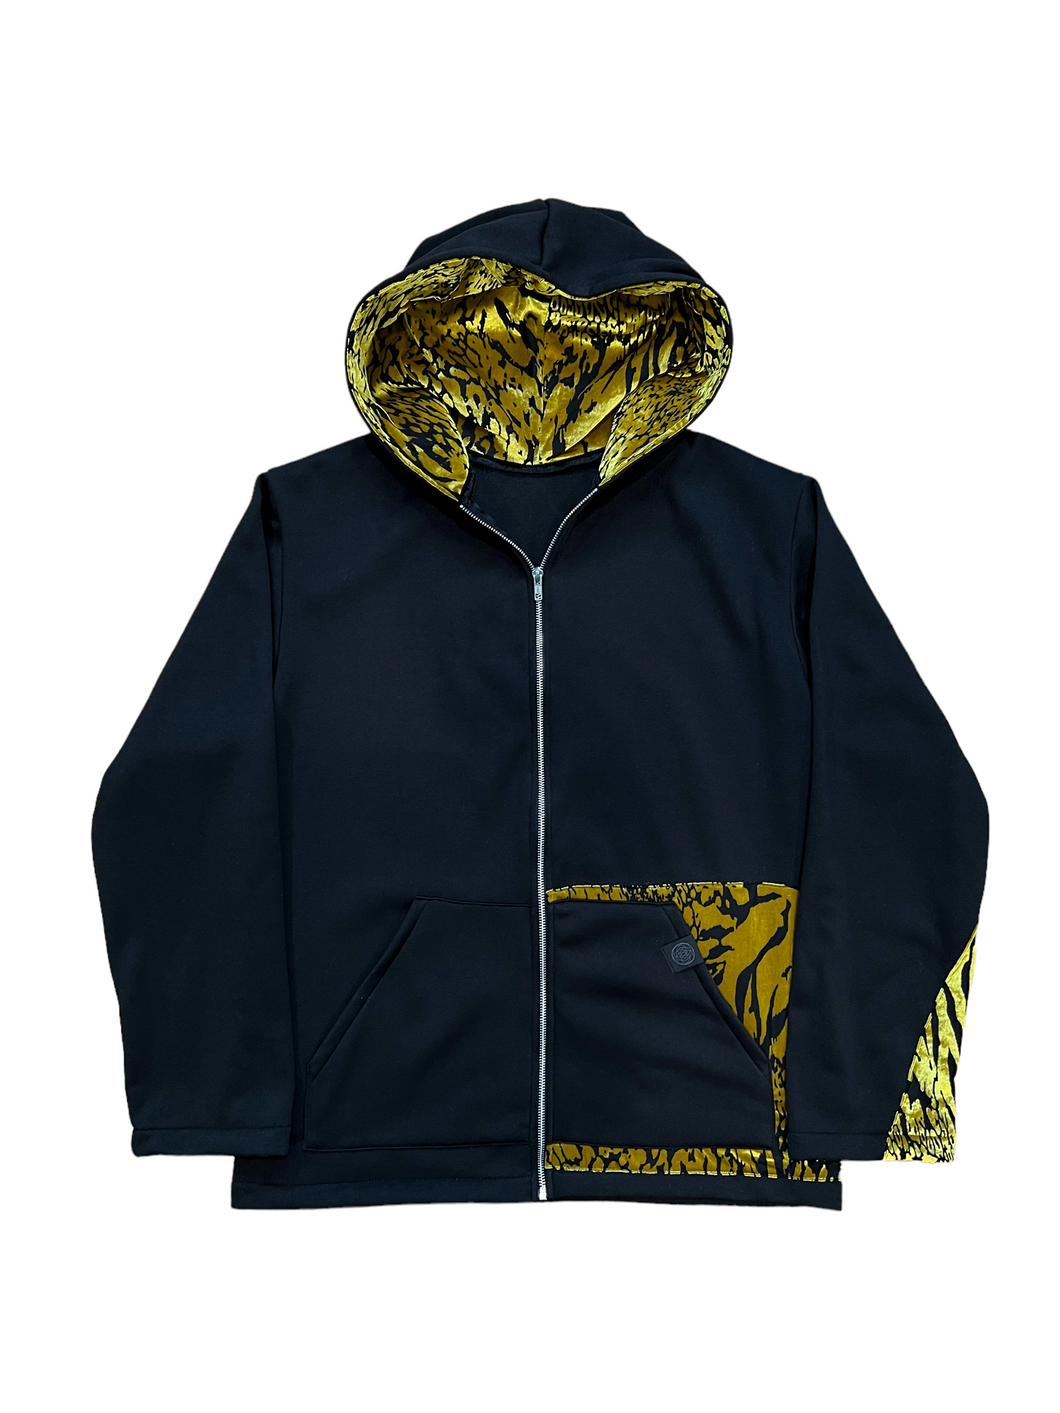 Limited Edition GOLDEN PANTHER JACKET